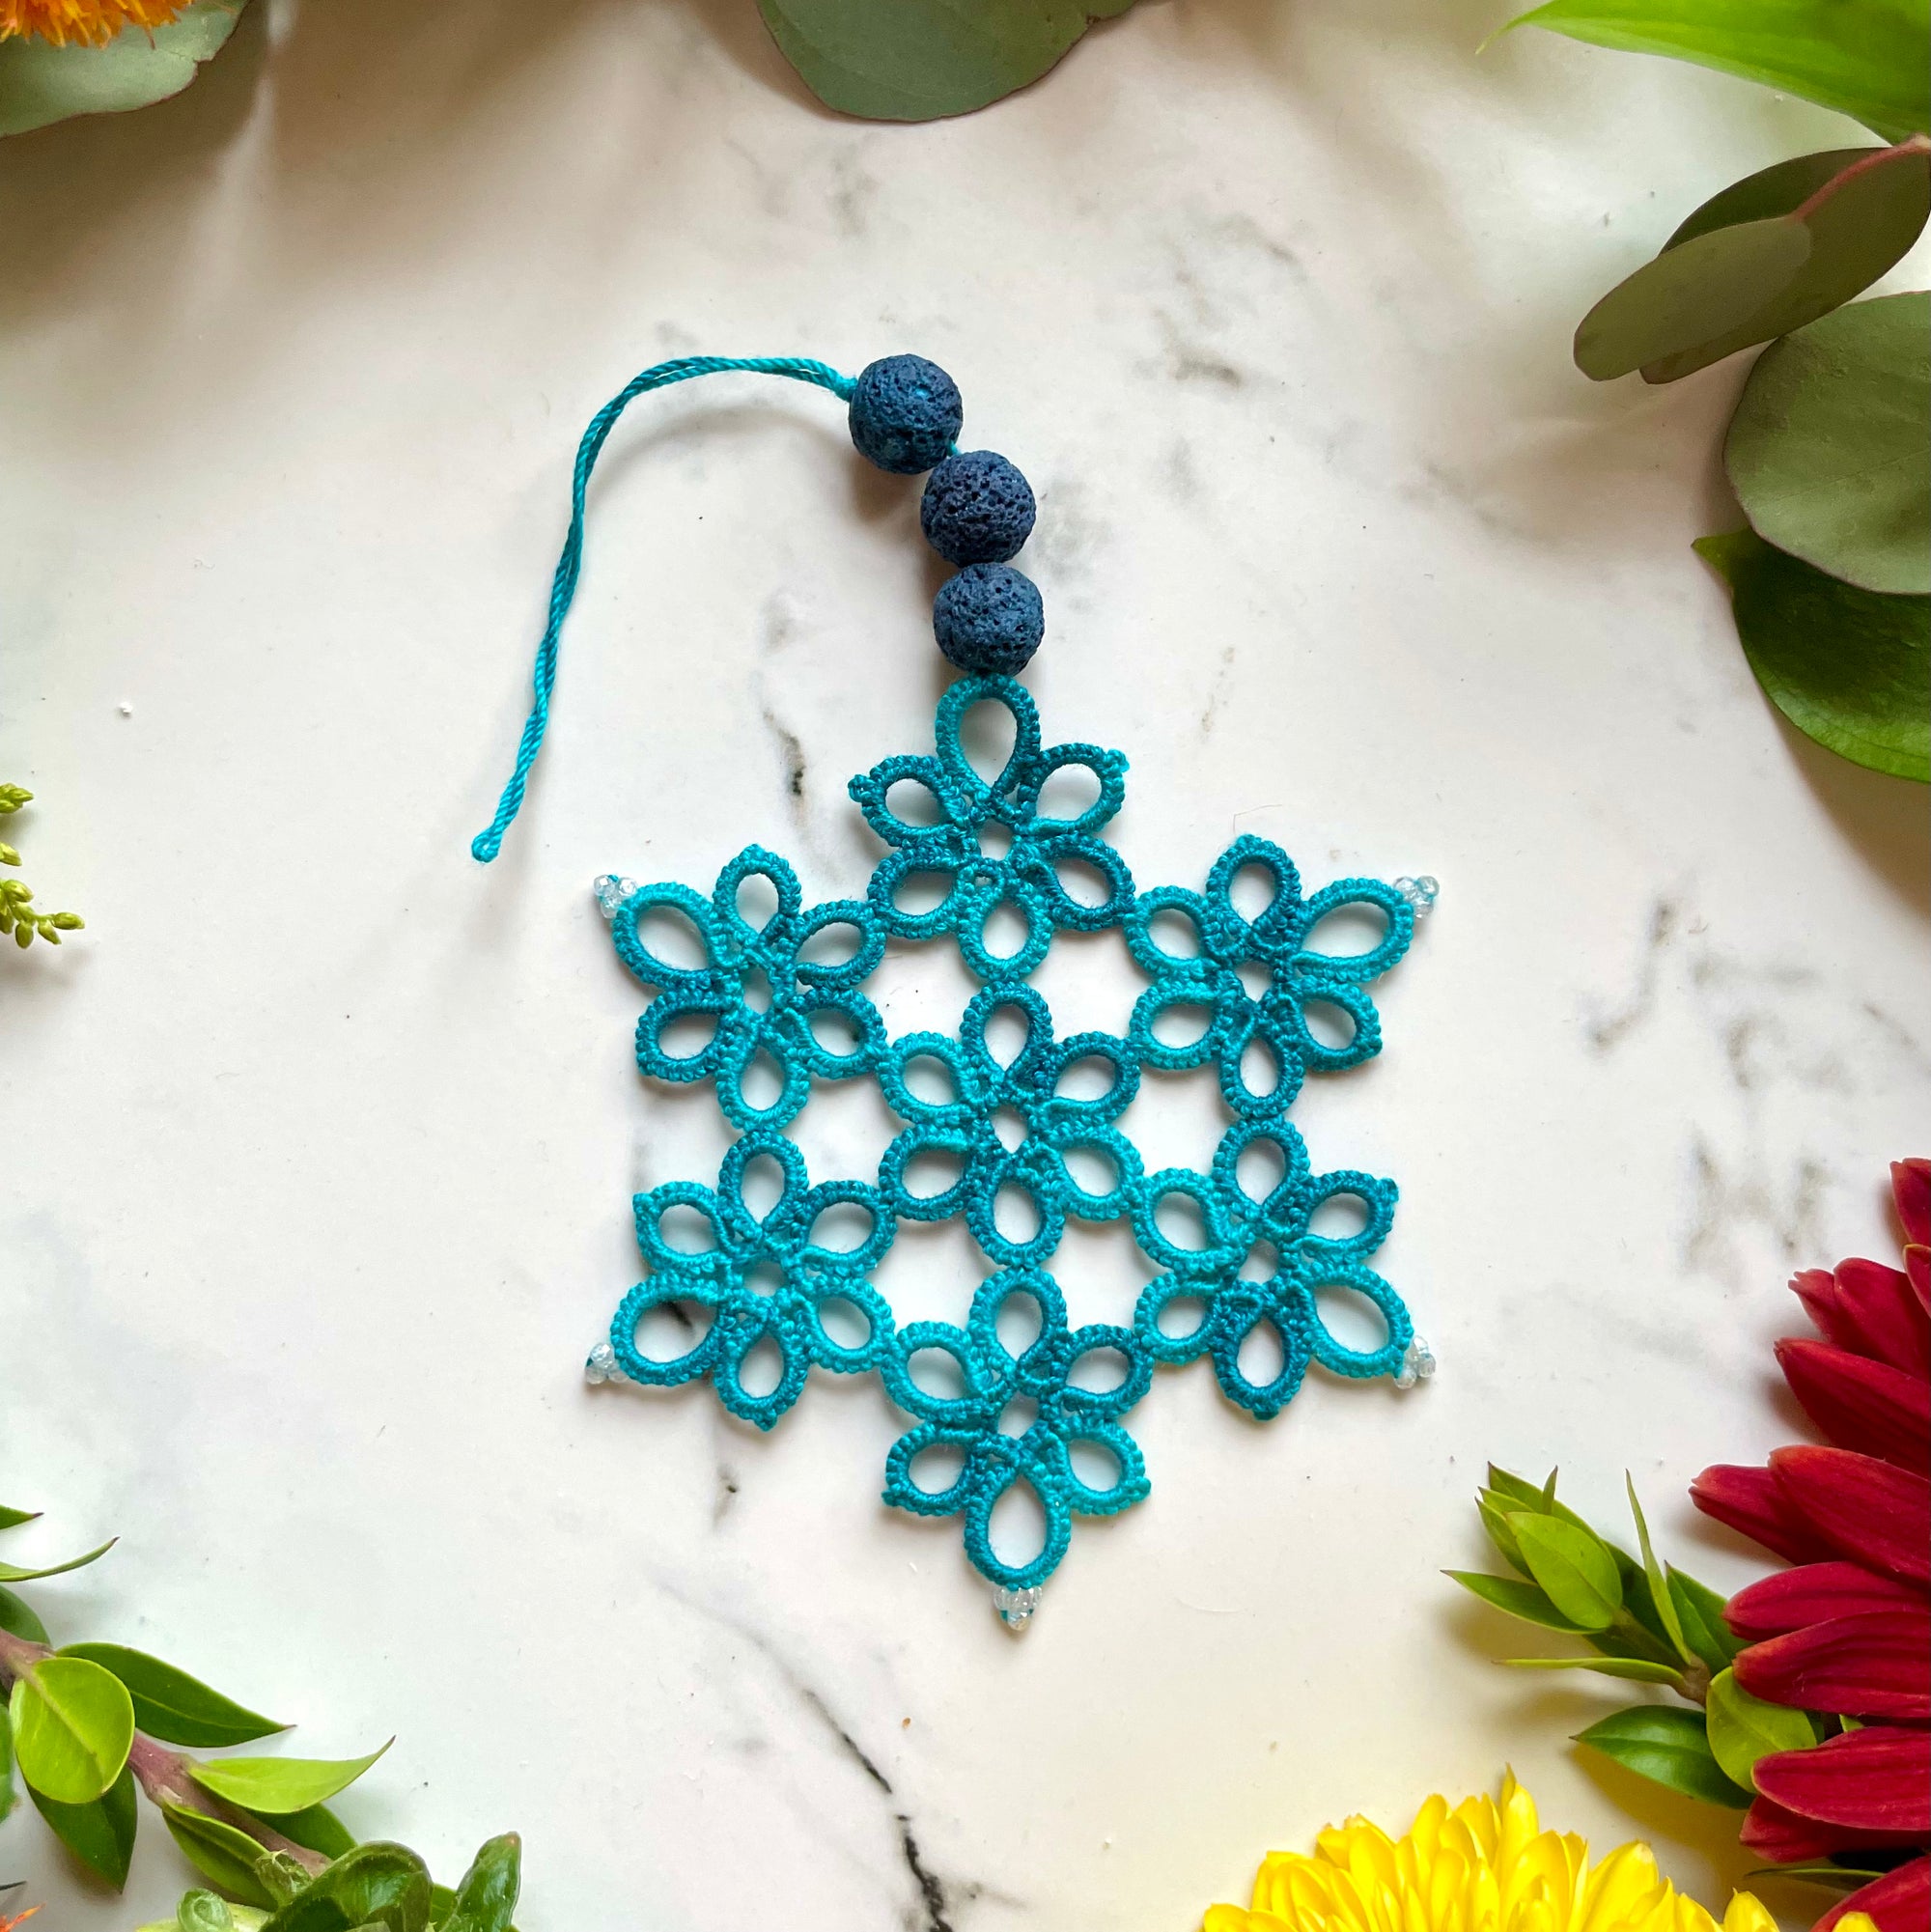 Tatted Lace Snowflake Ornament - Style #1